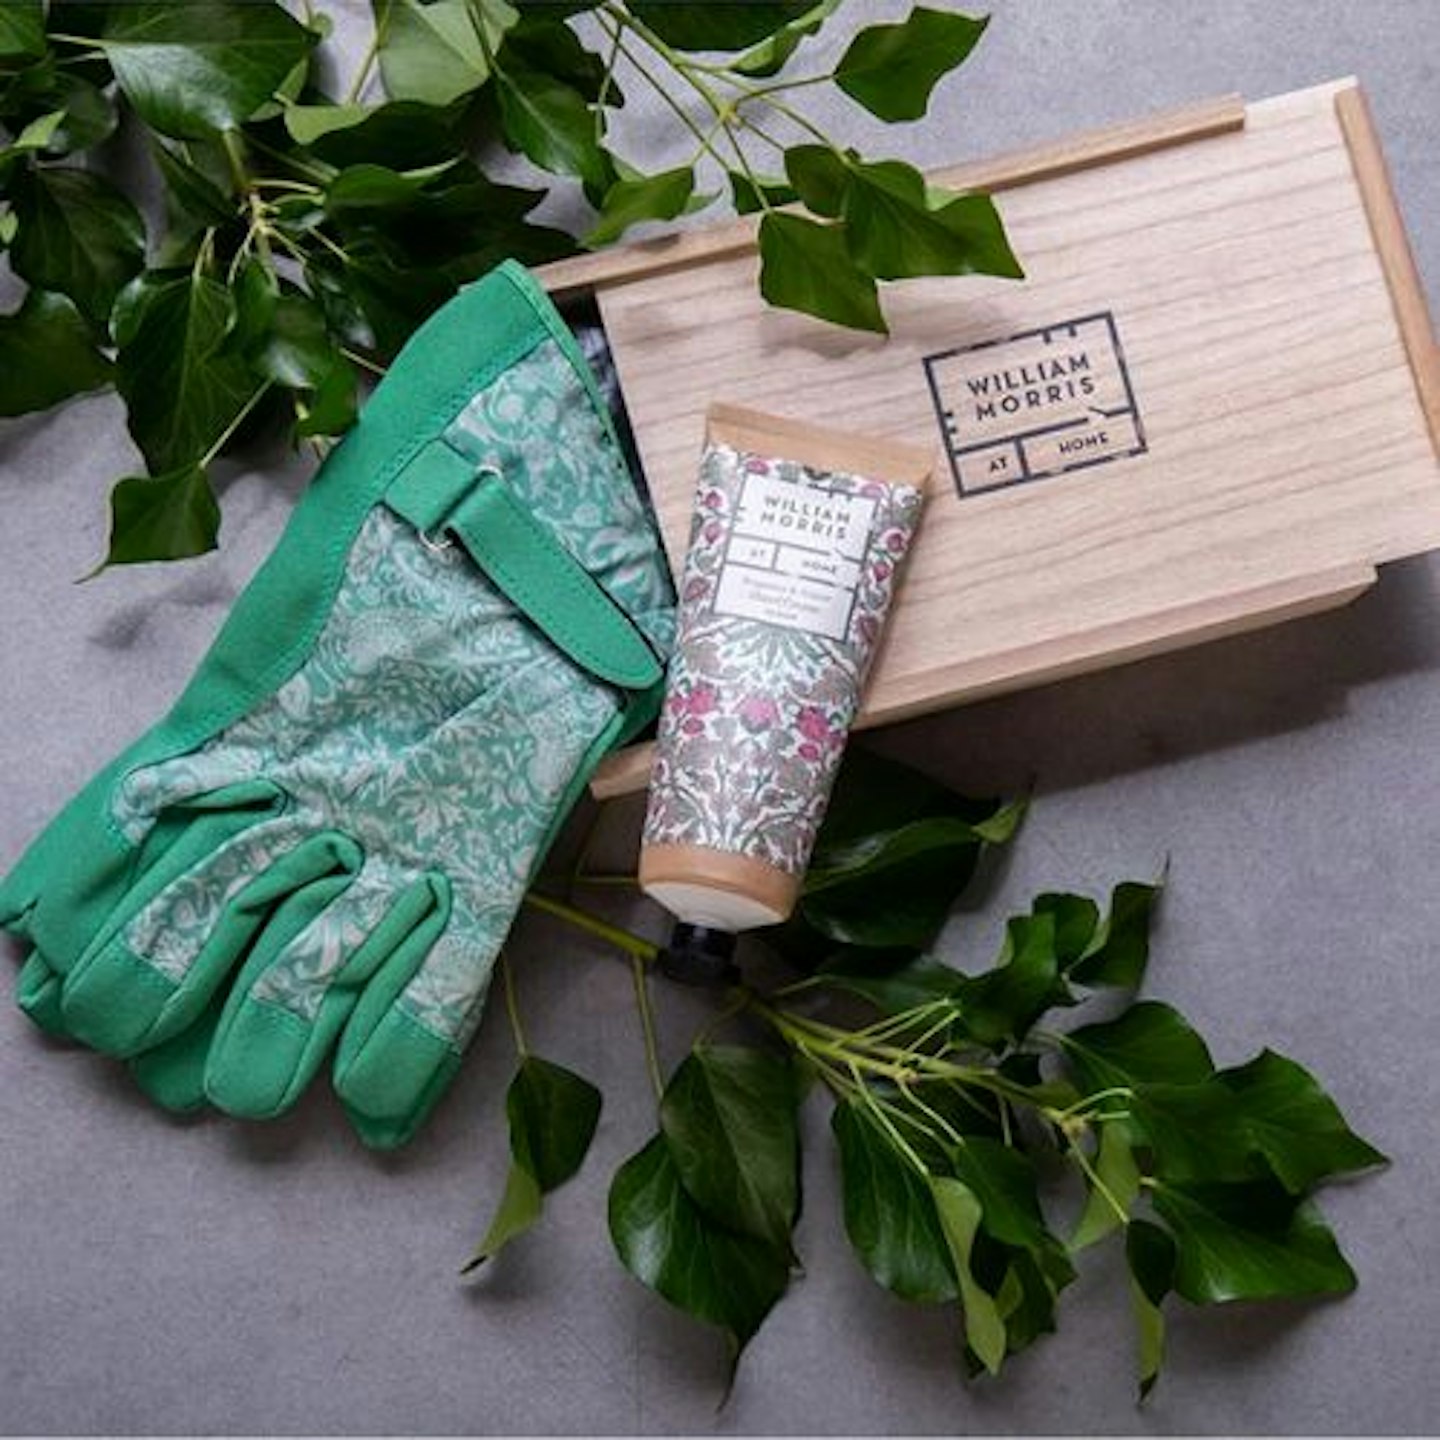 Best Mothers Day gifts for Nanny William Morris At Home Garden Lily Glove Set